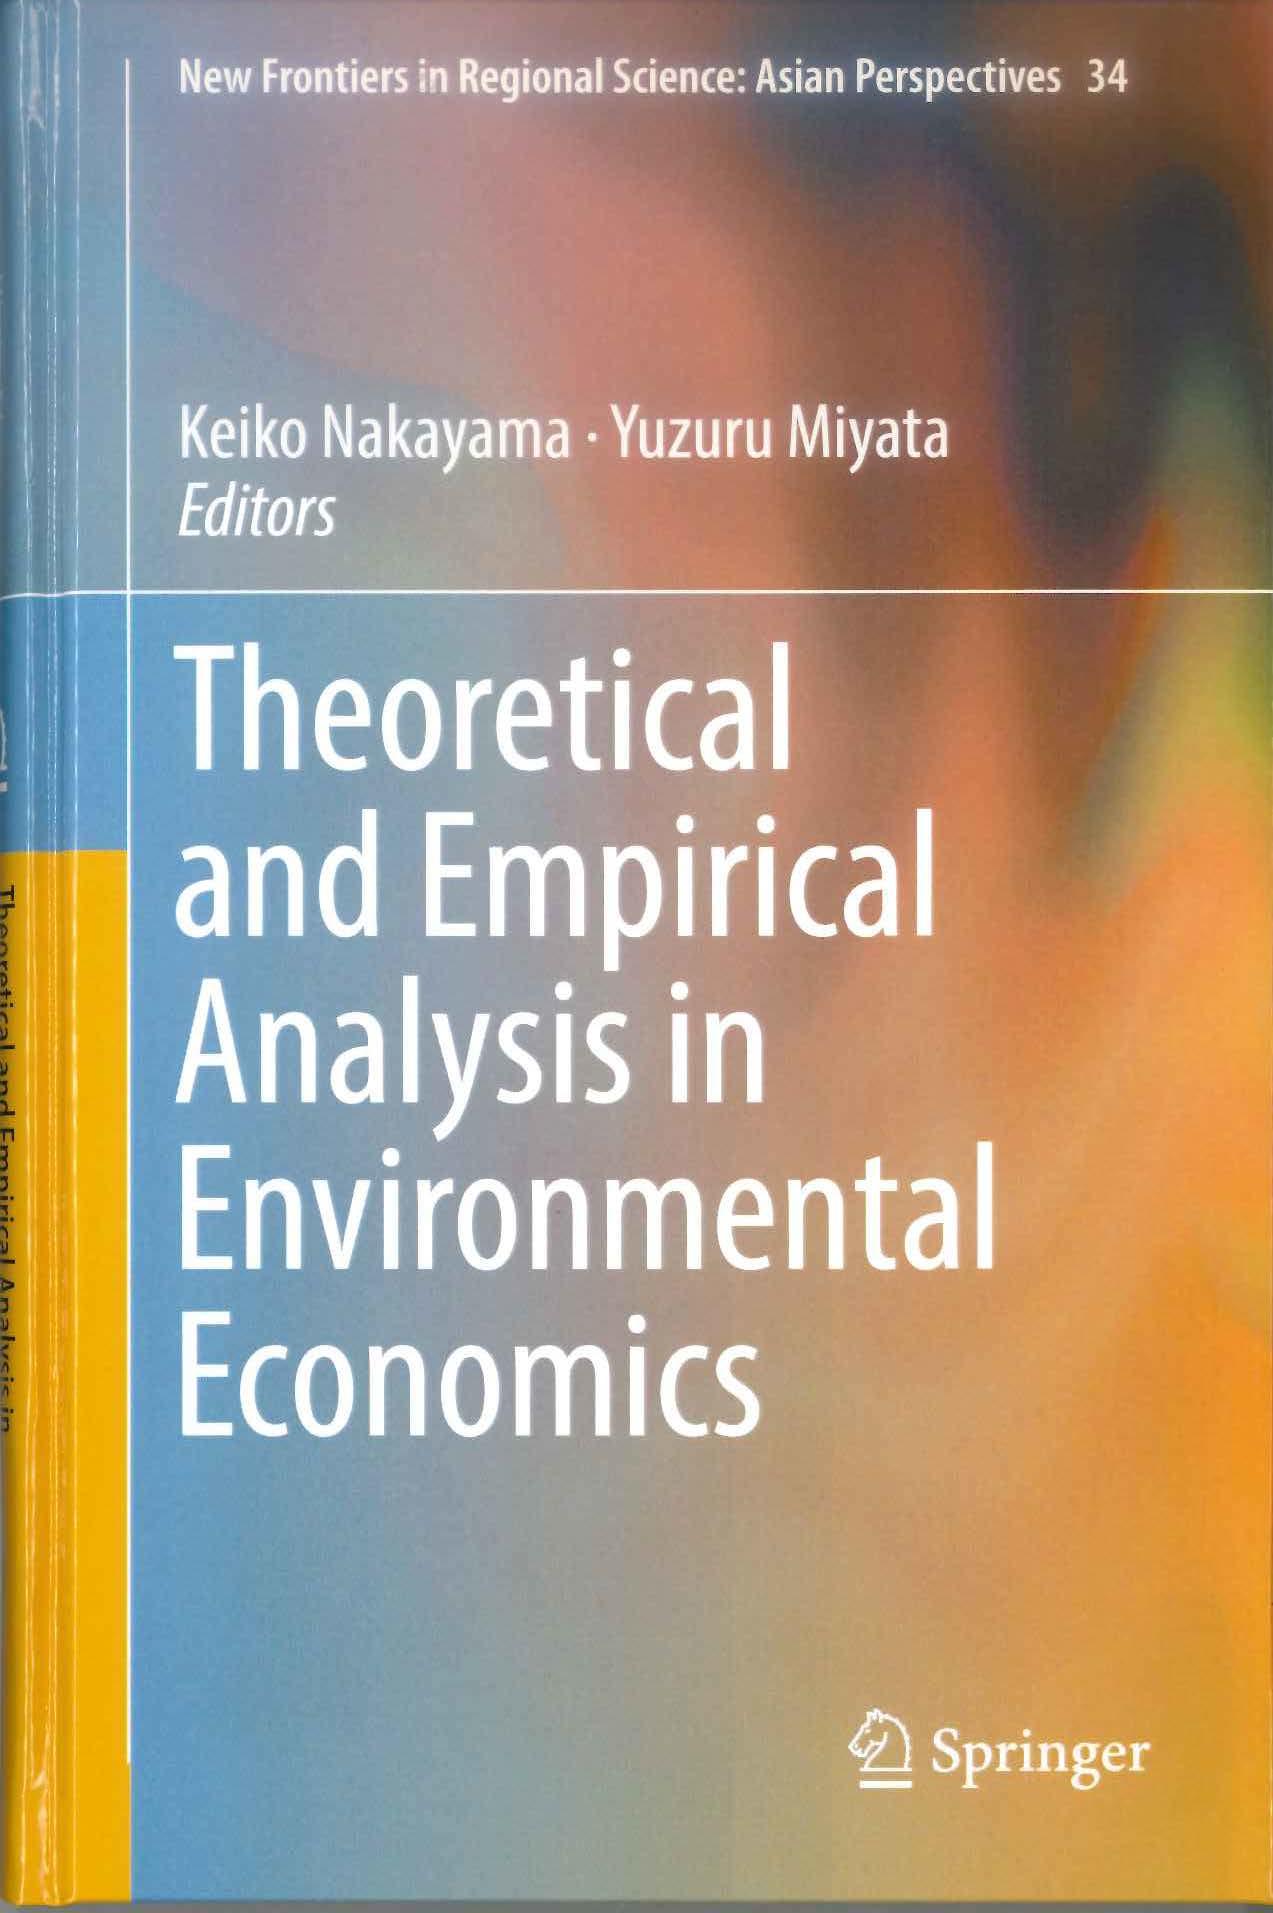 Theoretical and Empirical Analysis in Environmental Economics